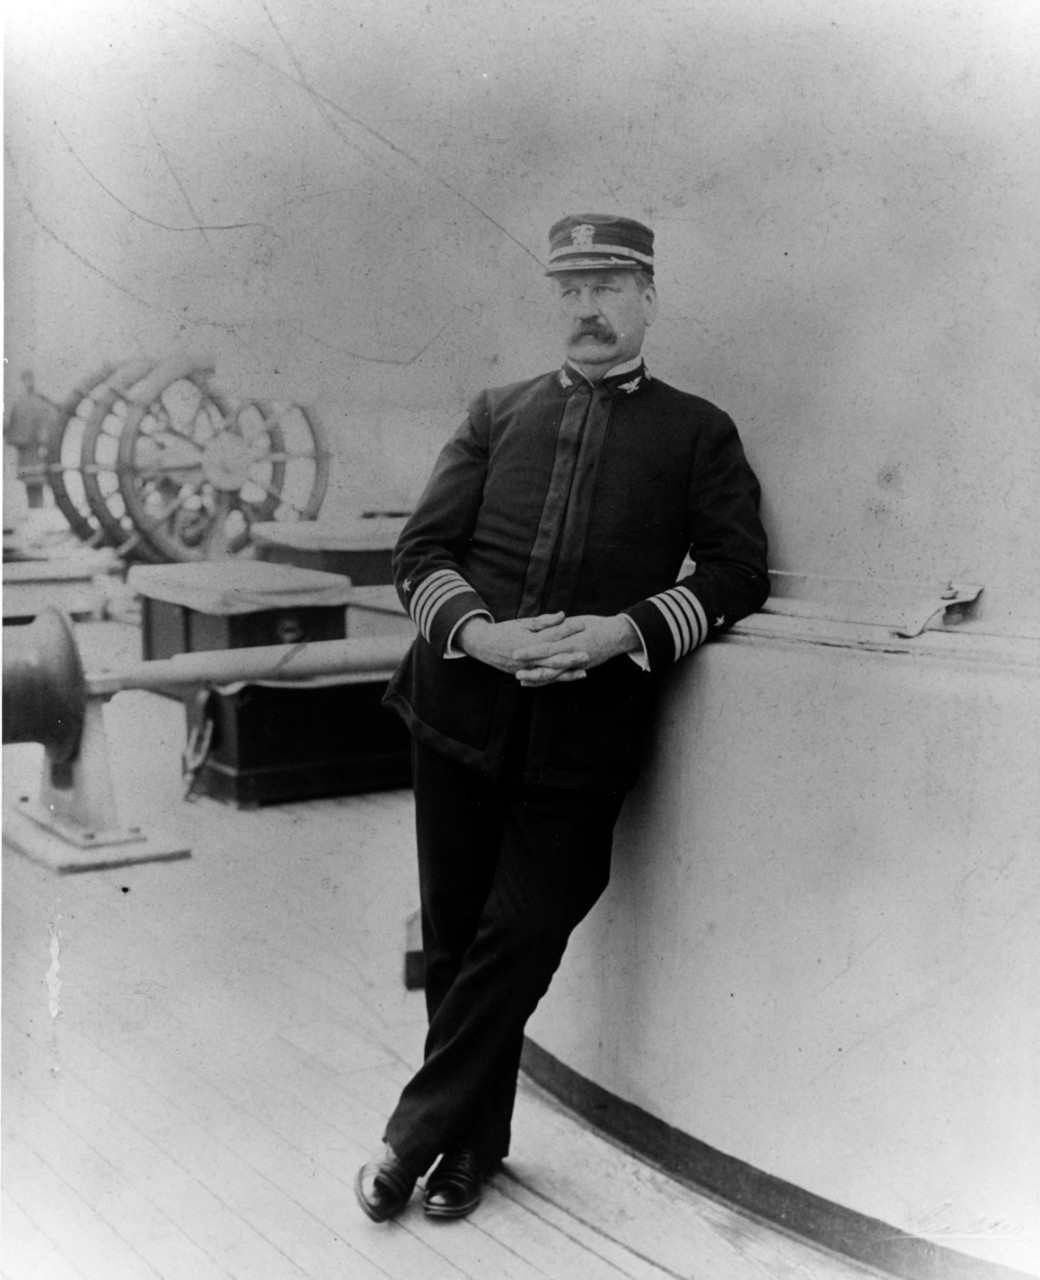 Francis A. Cook, Captain, USN